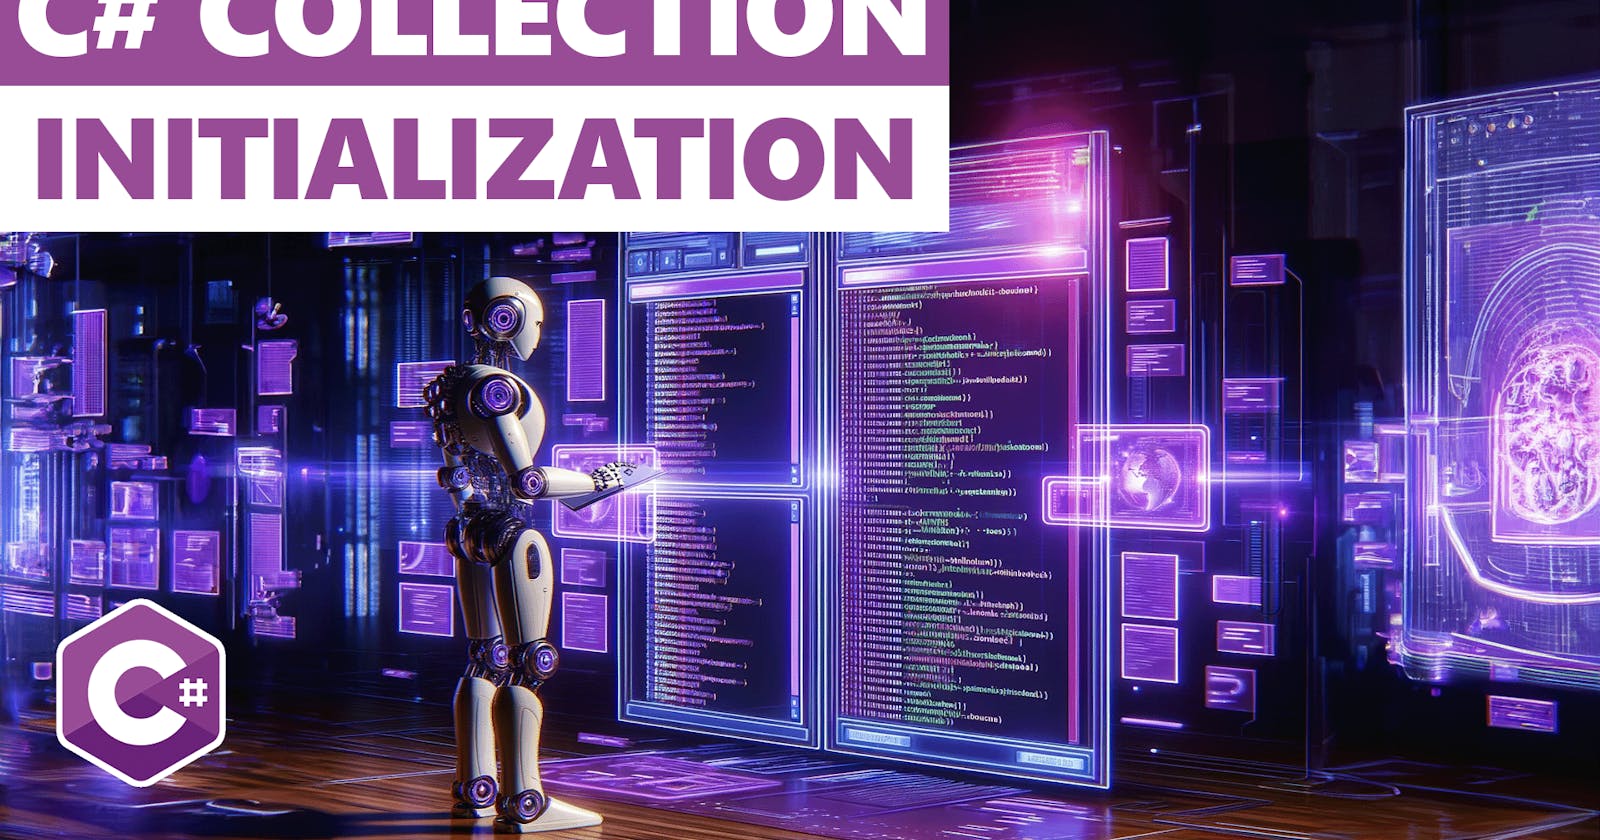 Collection Initializers And Collection Expressions In C# – Simplified Code Examples